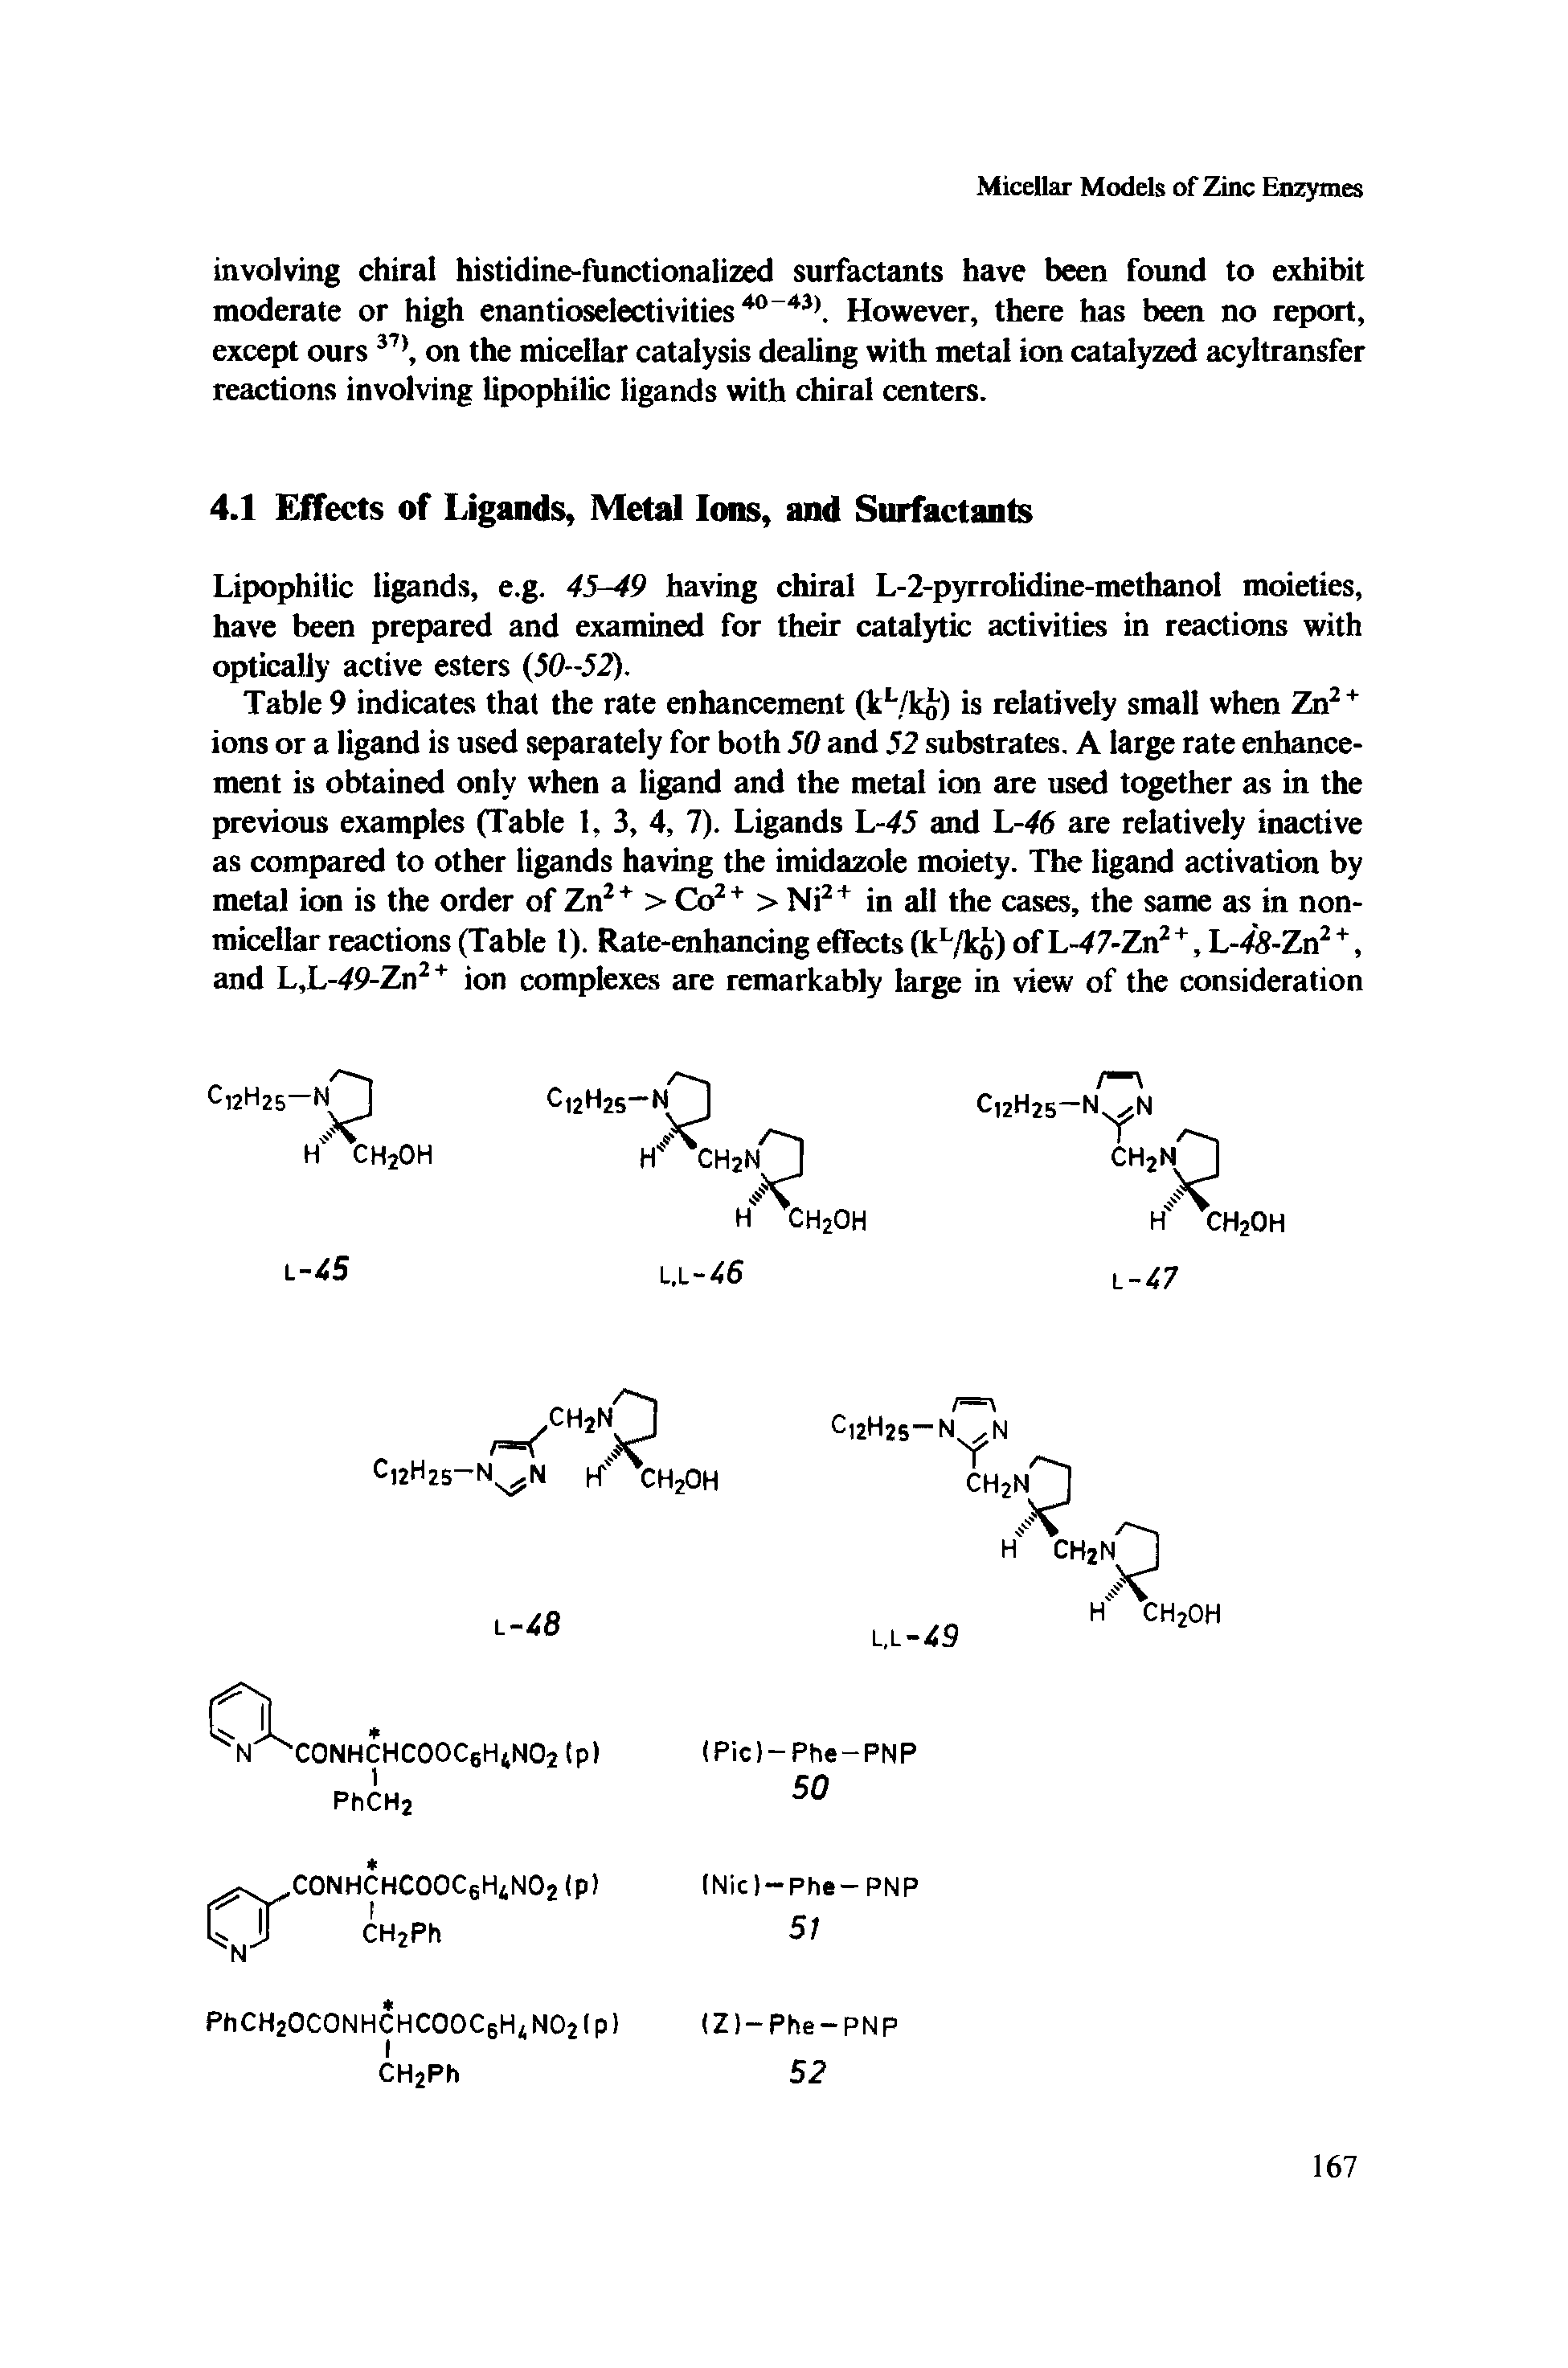 Table 9 indicates that the rate enhancement (kL/ko) is relatively small when Zn2 + ions or a ligand is used separately for both 50 and 52 substrates. A large rate enhancement is obtained only when a ligand and the metal ion are used together as in the previous examples (Table 1, 3, 4, 7). Ligands L-45 and L-46 are relatively inactive as compared to other ligands having the imidazole moiety. The ligand activation by metal ion is the order of Zn2+ > Co2+ > Ni2+ in all the cases, the same as in non-micellar reactions (Table 1). Rate-enhancing effects (kL/ko) of L-47-Zn2 +, L-48-Zn2 +, and L,L-49-Zn2+ ion complexes are remarkably large in view of the consideration...